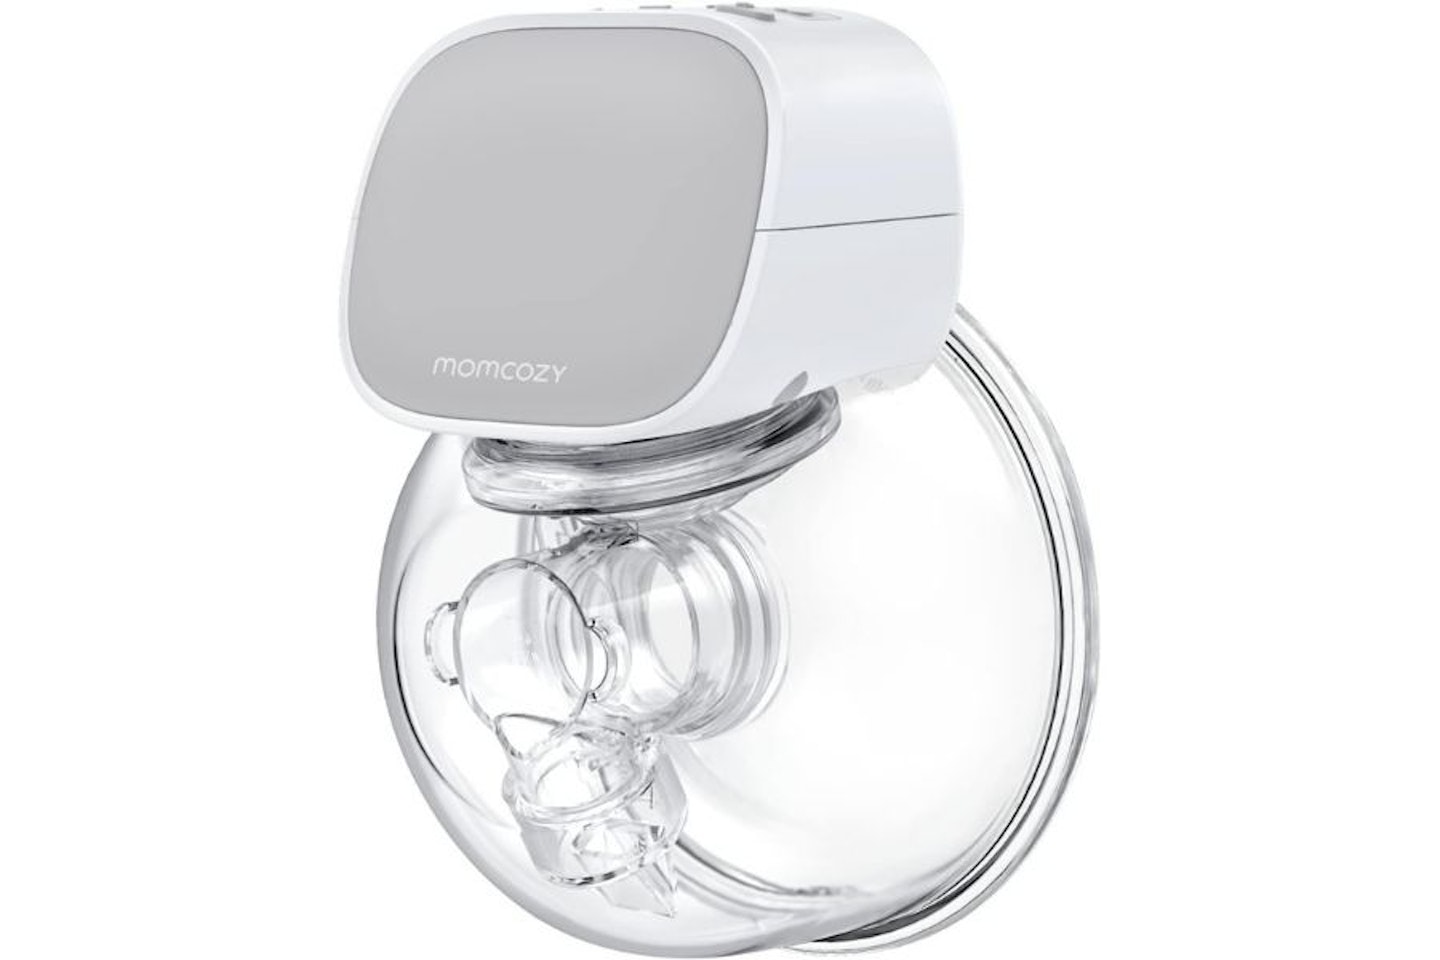 Beauty by Carlie - Probably my most exciting purchase this entire  pregnancy! I'm so excited to use the @momcozy M5 breast pump, plus I also  bought the lactation massager AND a nursing